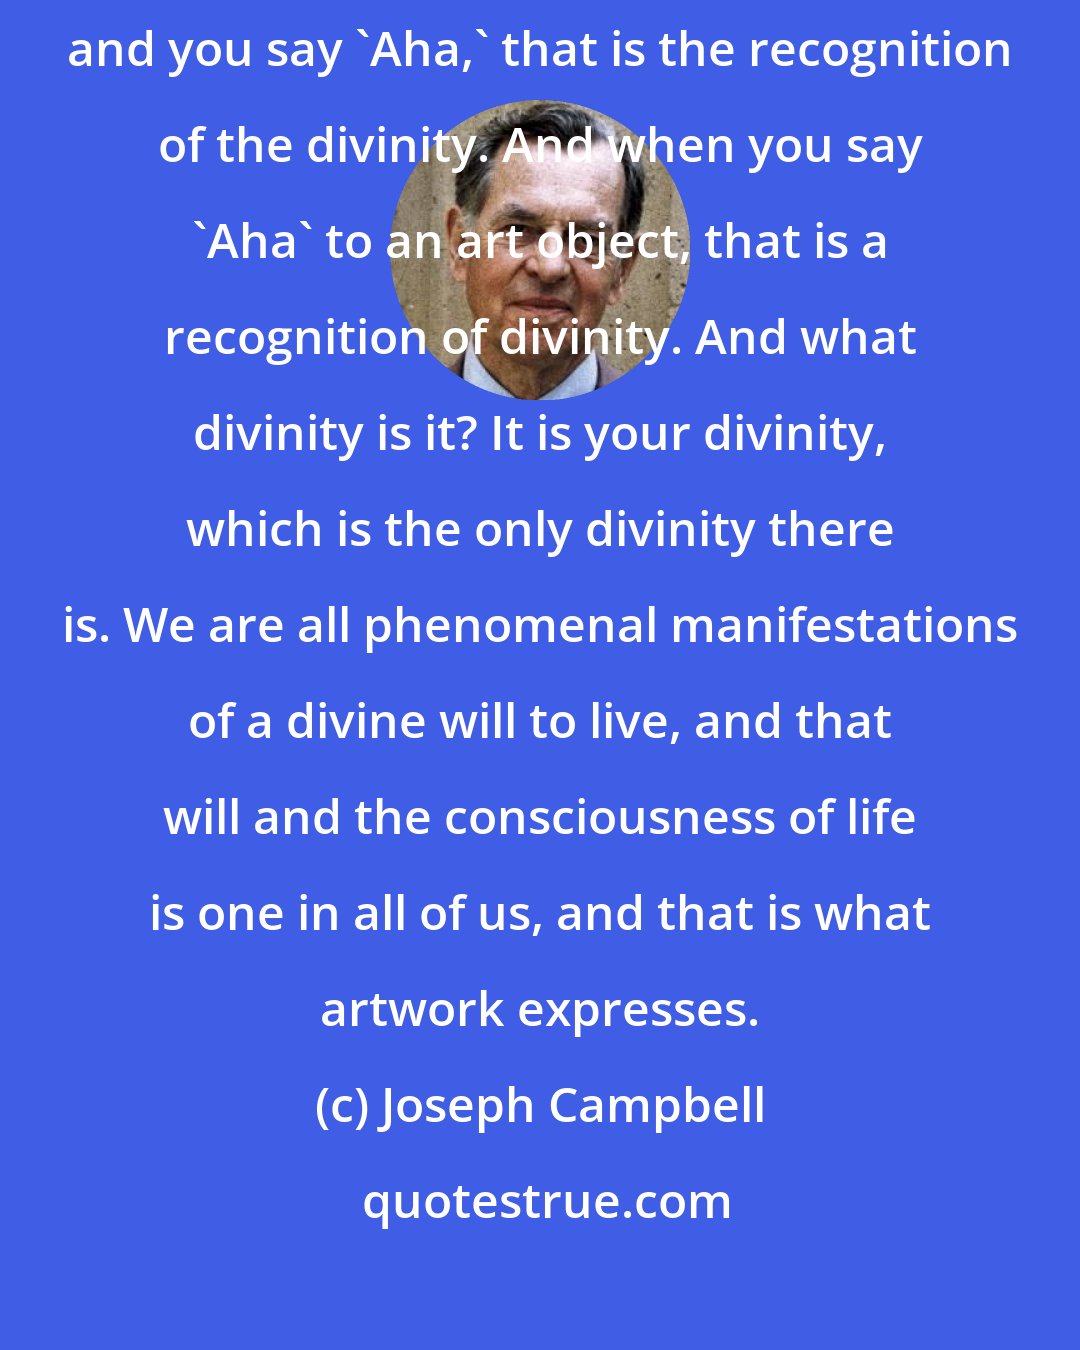 Joseph Campbell: In one of the Upanishads it says, when the glow of a sunset holds you and you say 'Aha,' that is the recognition of the divinity. And when you say 'Aha' to an art object, that is a recognition of divinity. And what divinity is it? It is your divinity, which is the only divinity there is. We are all phenomenal manifestations of a divine will to live, and that will and the consciousness of life is one in all of us, and that is what artwork expresses.